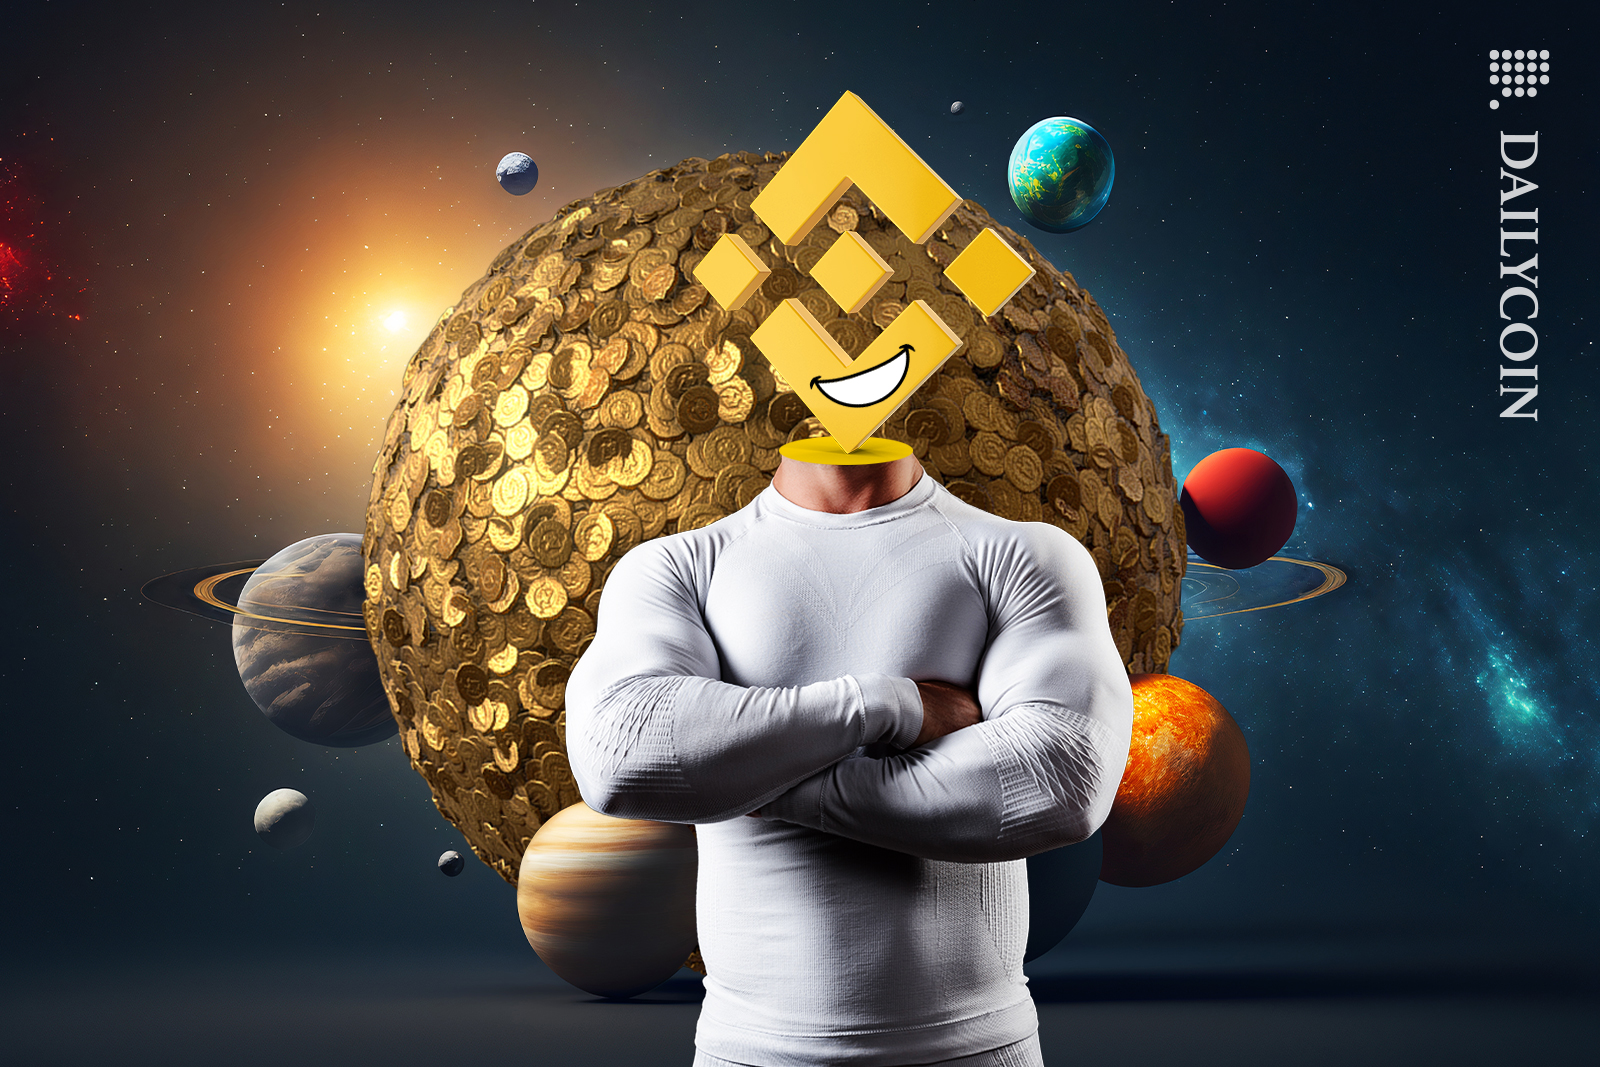 Mr. strongman Binance smiling, next to a planet made of coins.